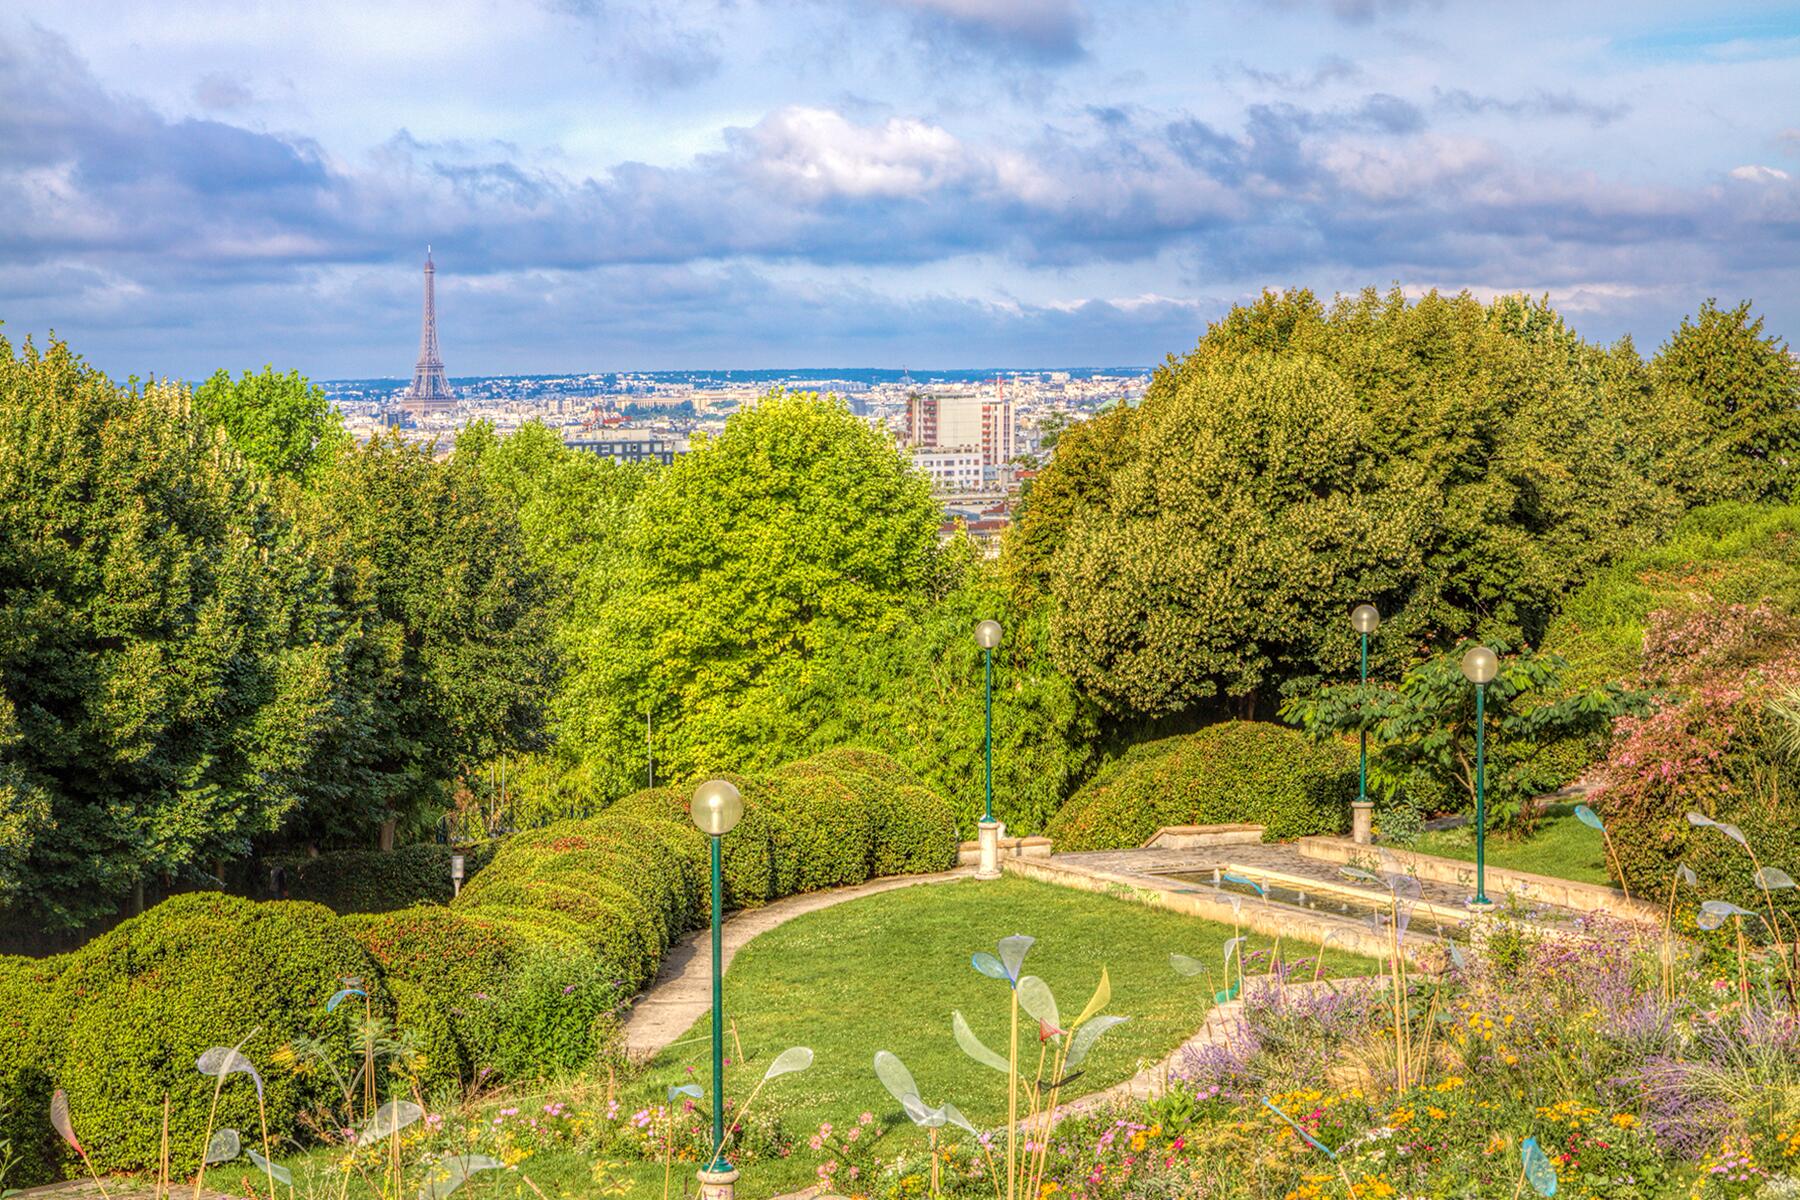 <a href='https://www.fodors.com/world/europe/france/paris/experiences/news/photos/15-things-not-to-do-in-paris#'>From &quot;24 Things Not to Do in Paris: Don't Limit Yourself to Famous Monuments for Great Views of the City&quot;</a>